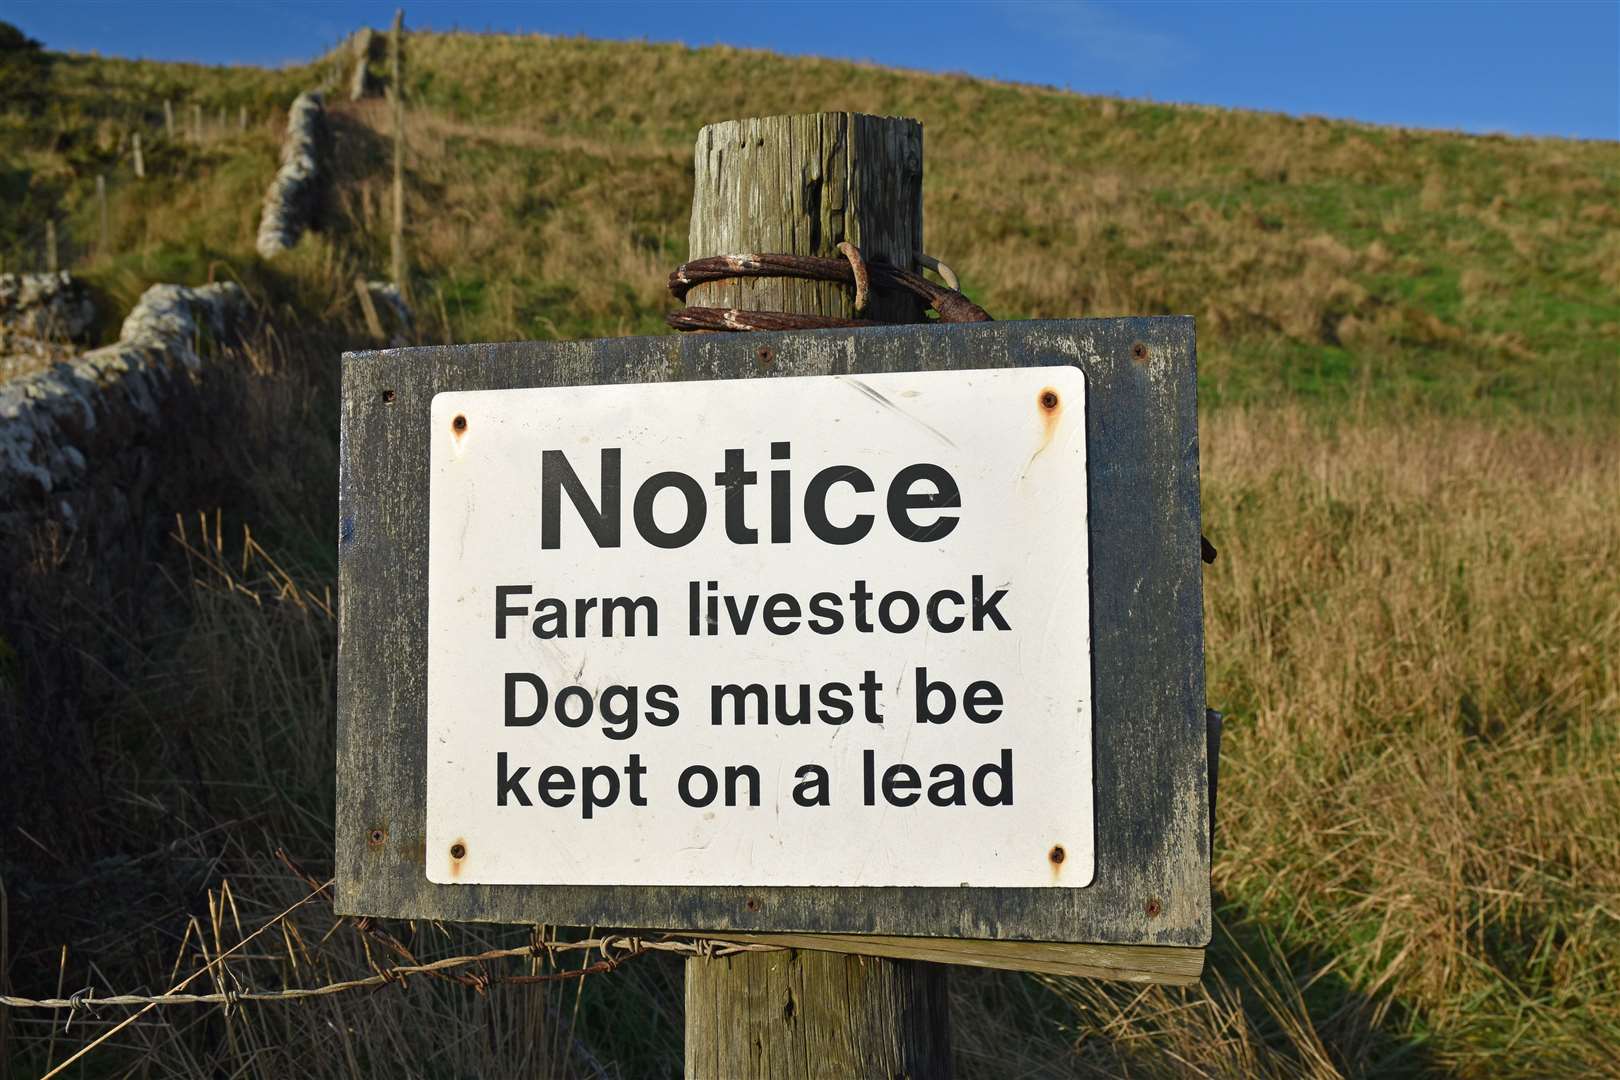 NSA has launched a campaign to raise awareness of the sheep-worrying issue among the dog-owning public.